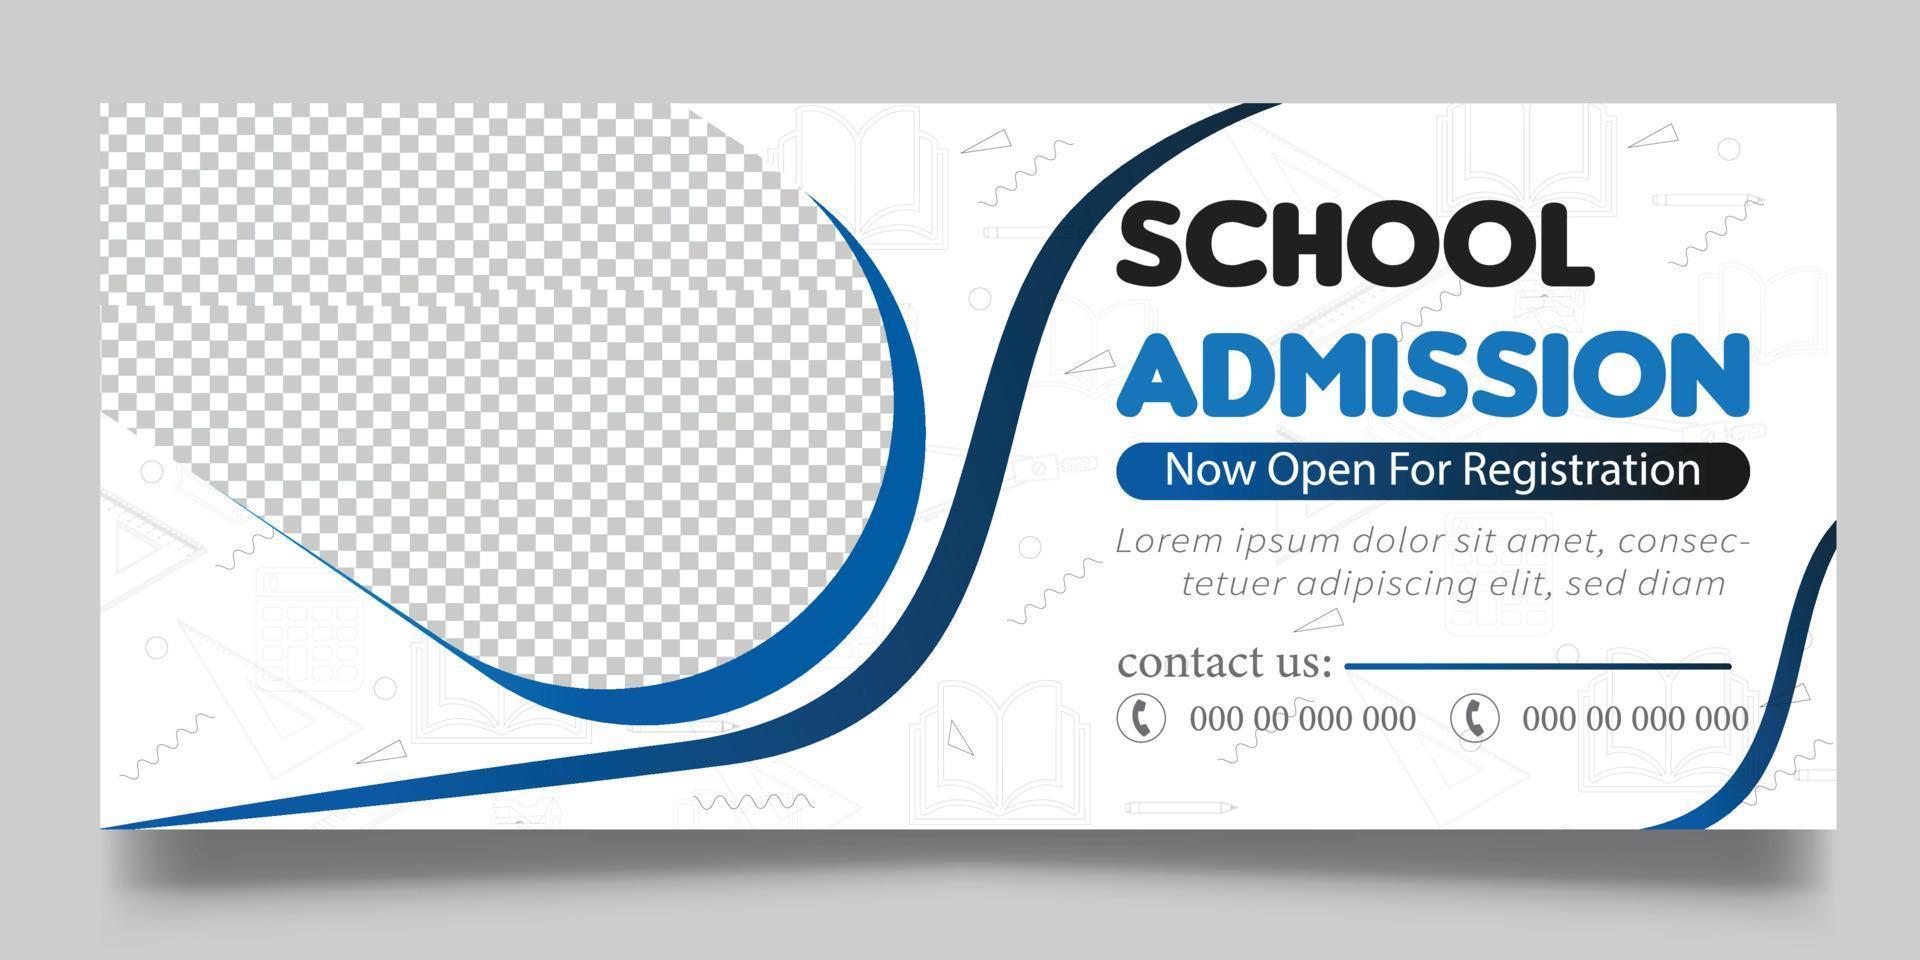 school admission banner for business finance vector